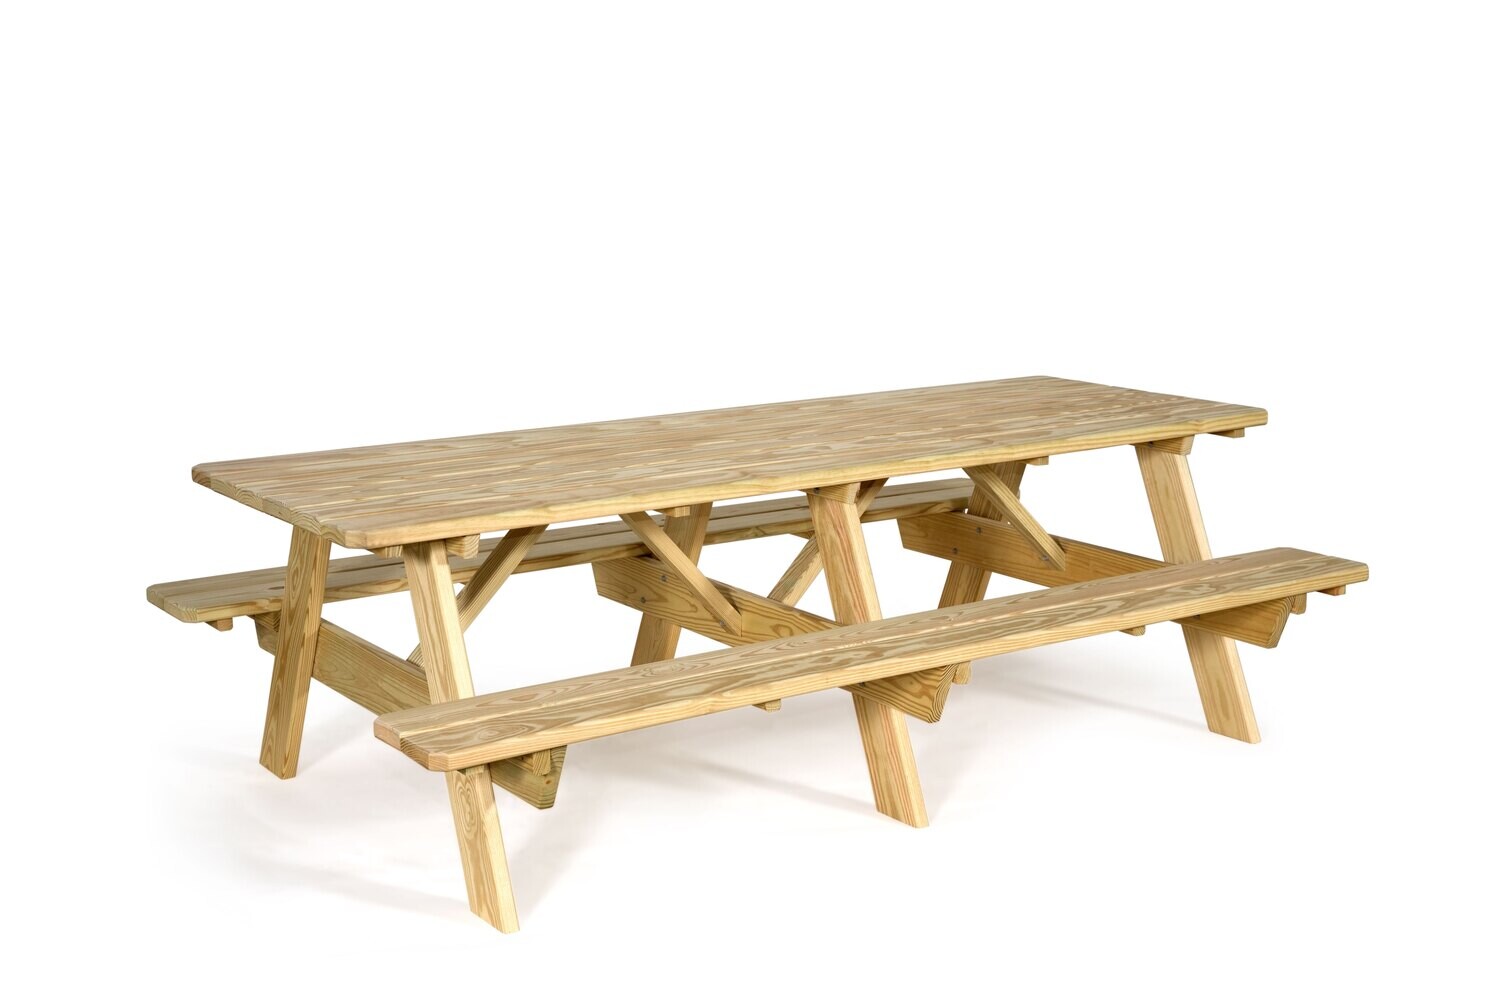 3' x 8' Picnic Table w/ Attached Benches